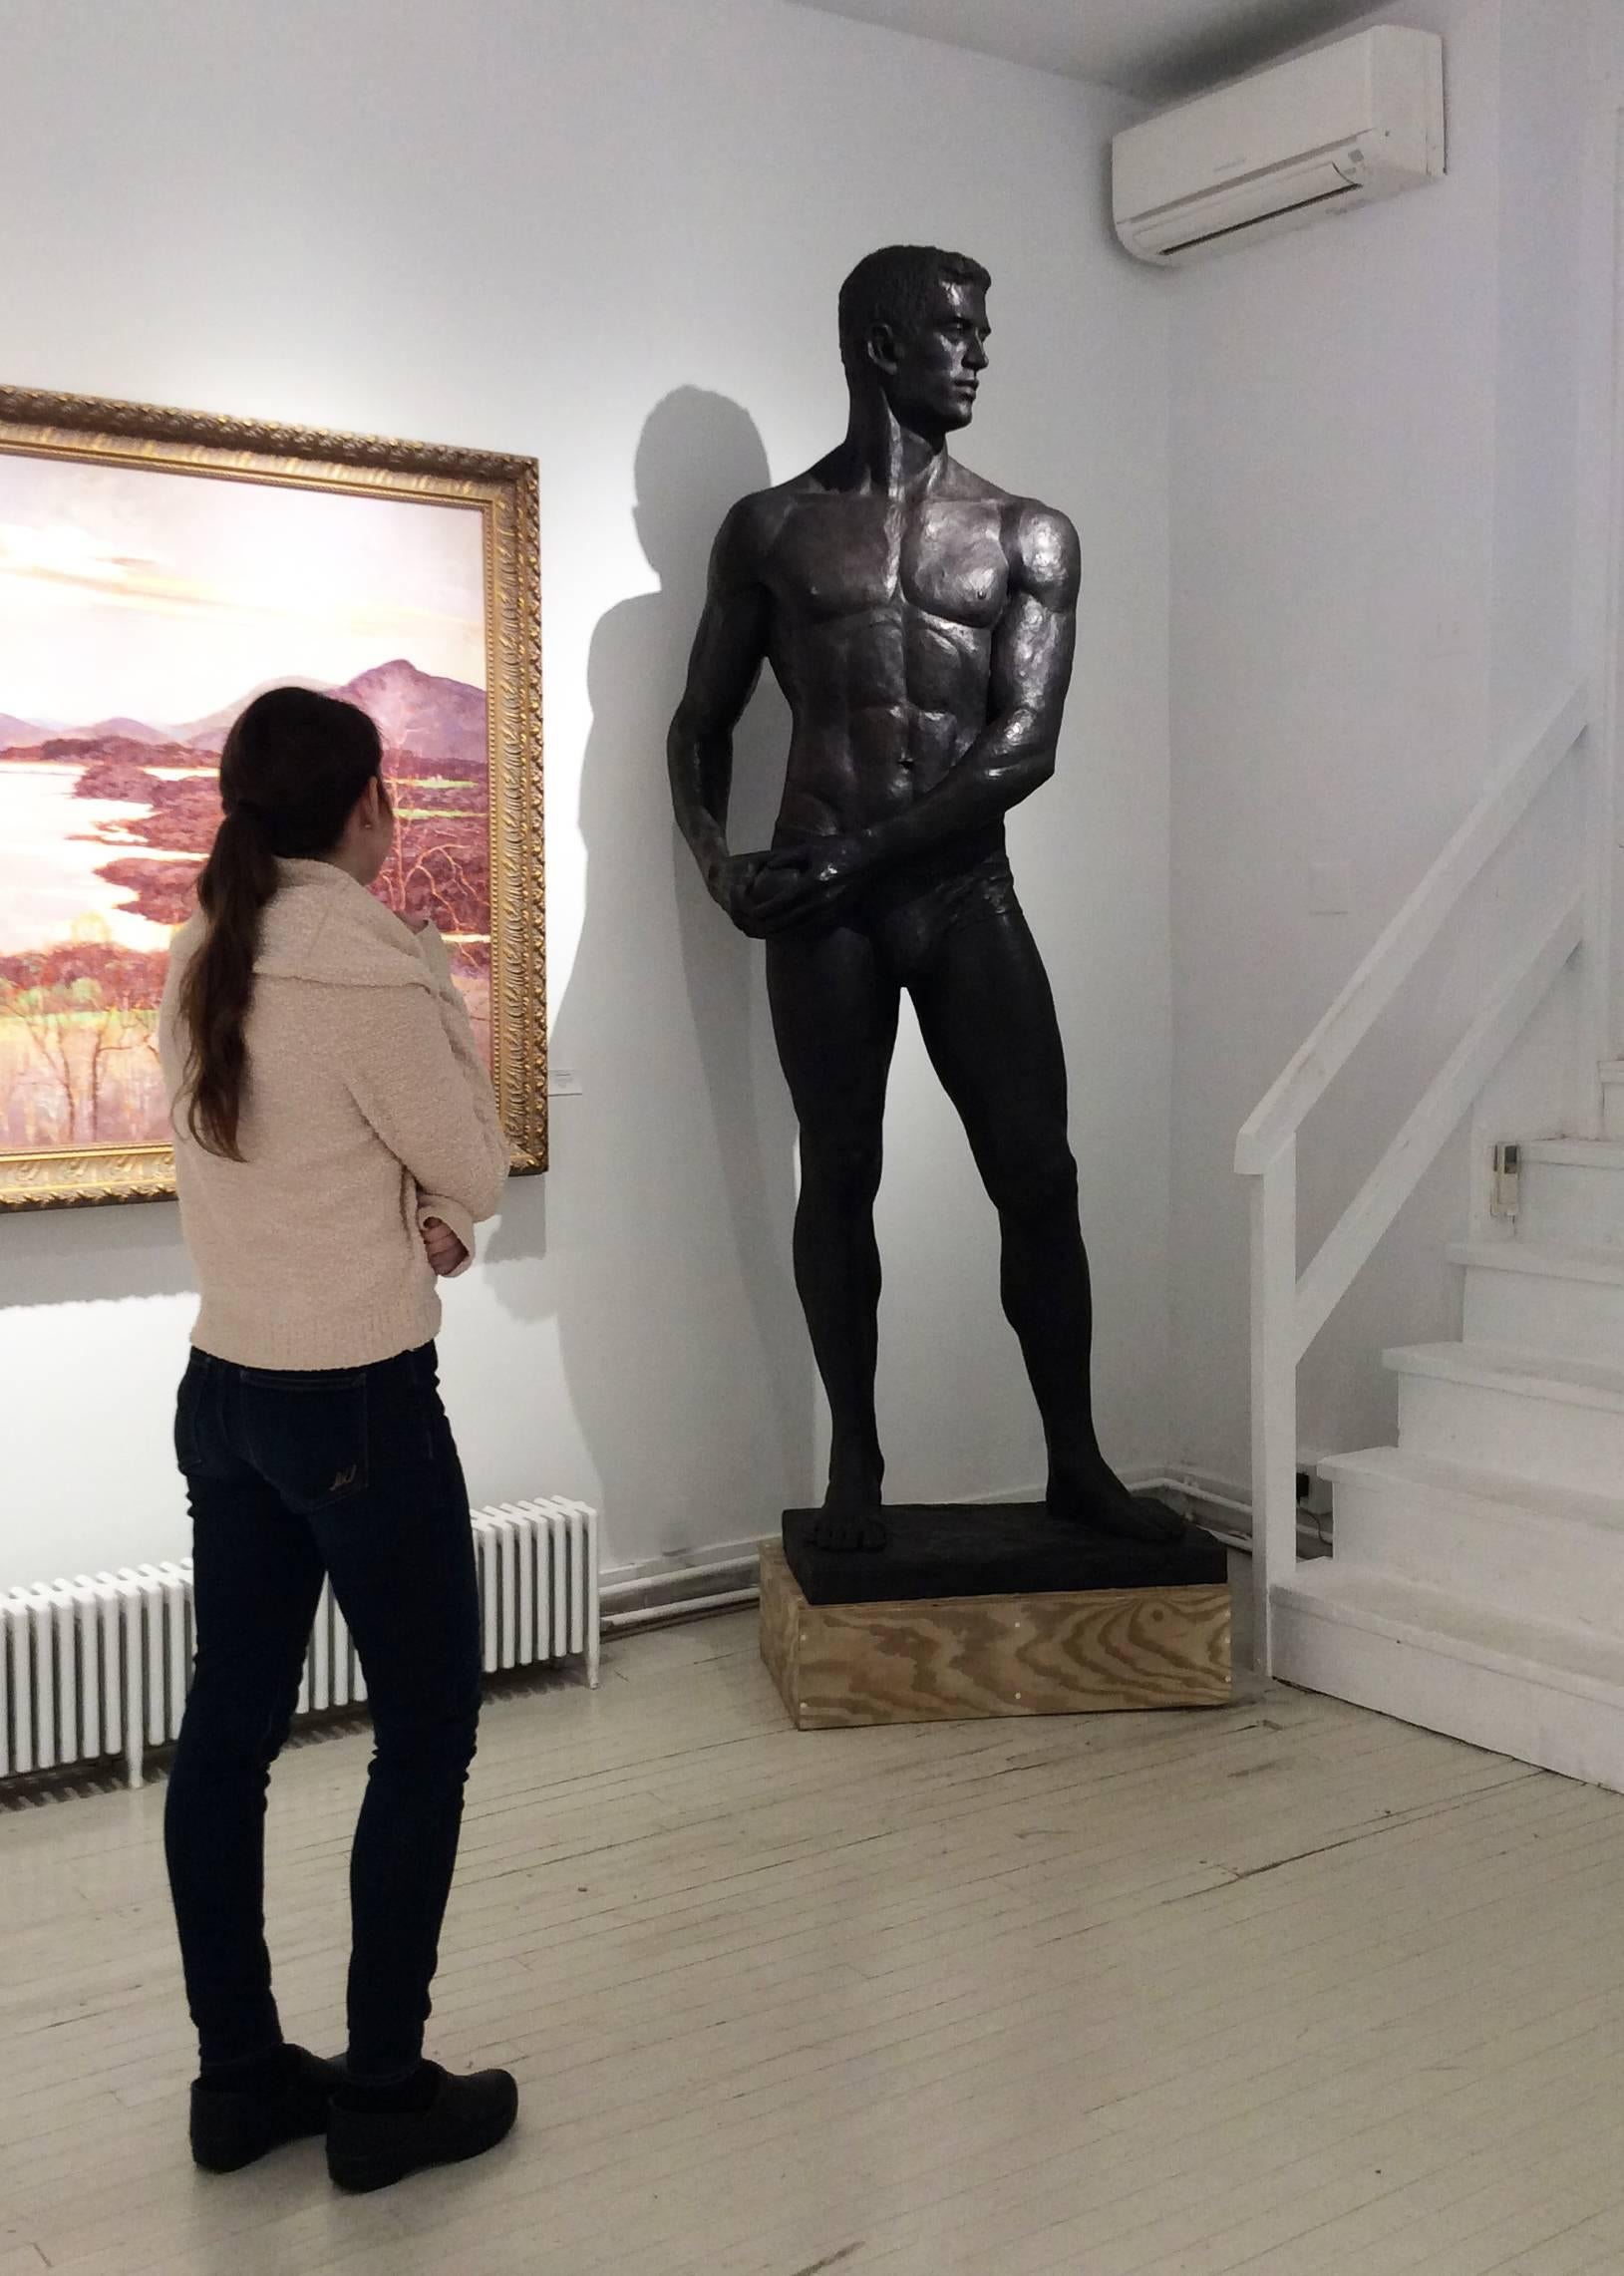 modern figurative bronze sculpture of a nude athlete 
8.5 feet tall and measures 36 inches at the widest point
bottom base measures 31.5 x 17.5 inches
This sculpture is offered by Carrie Haddad Gallery, located in Hudson, NY.

This figurative bronze